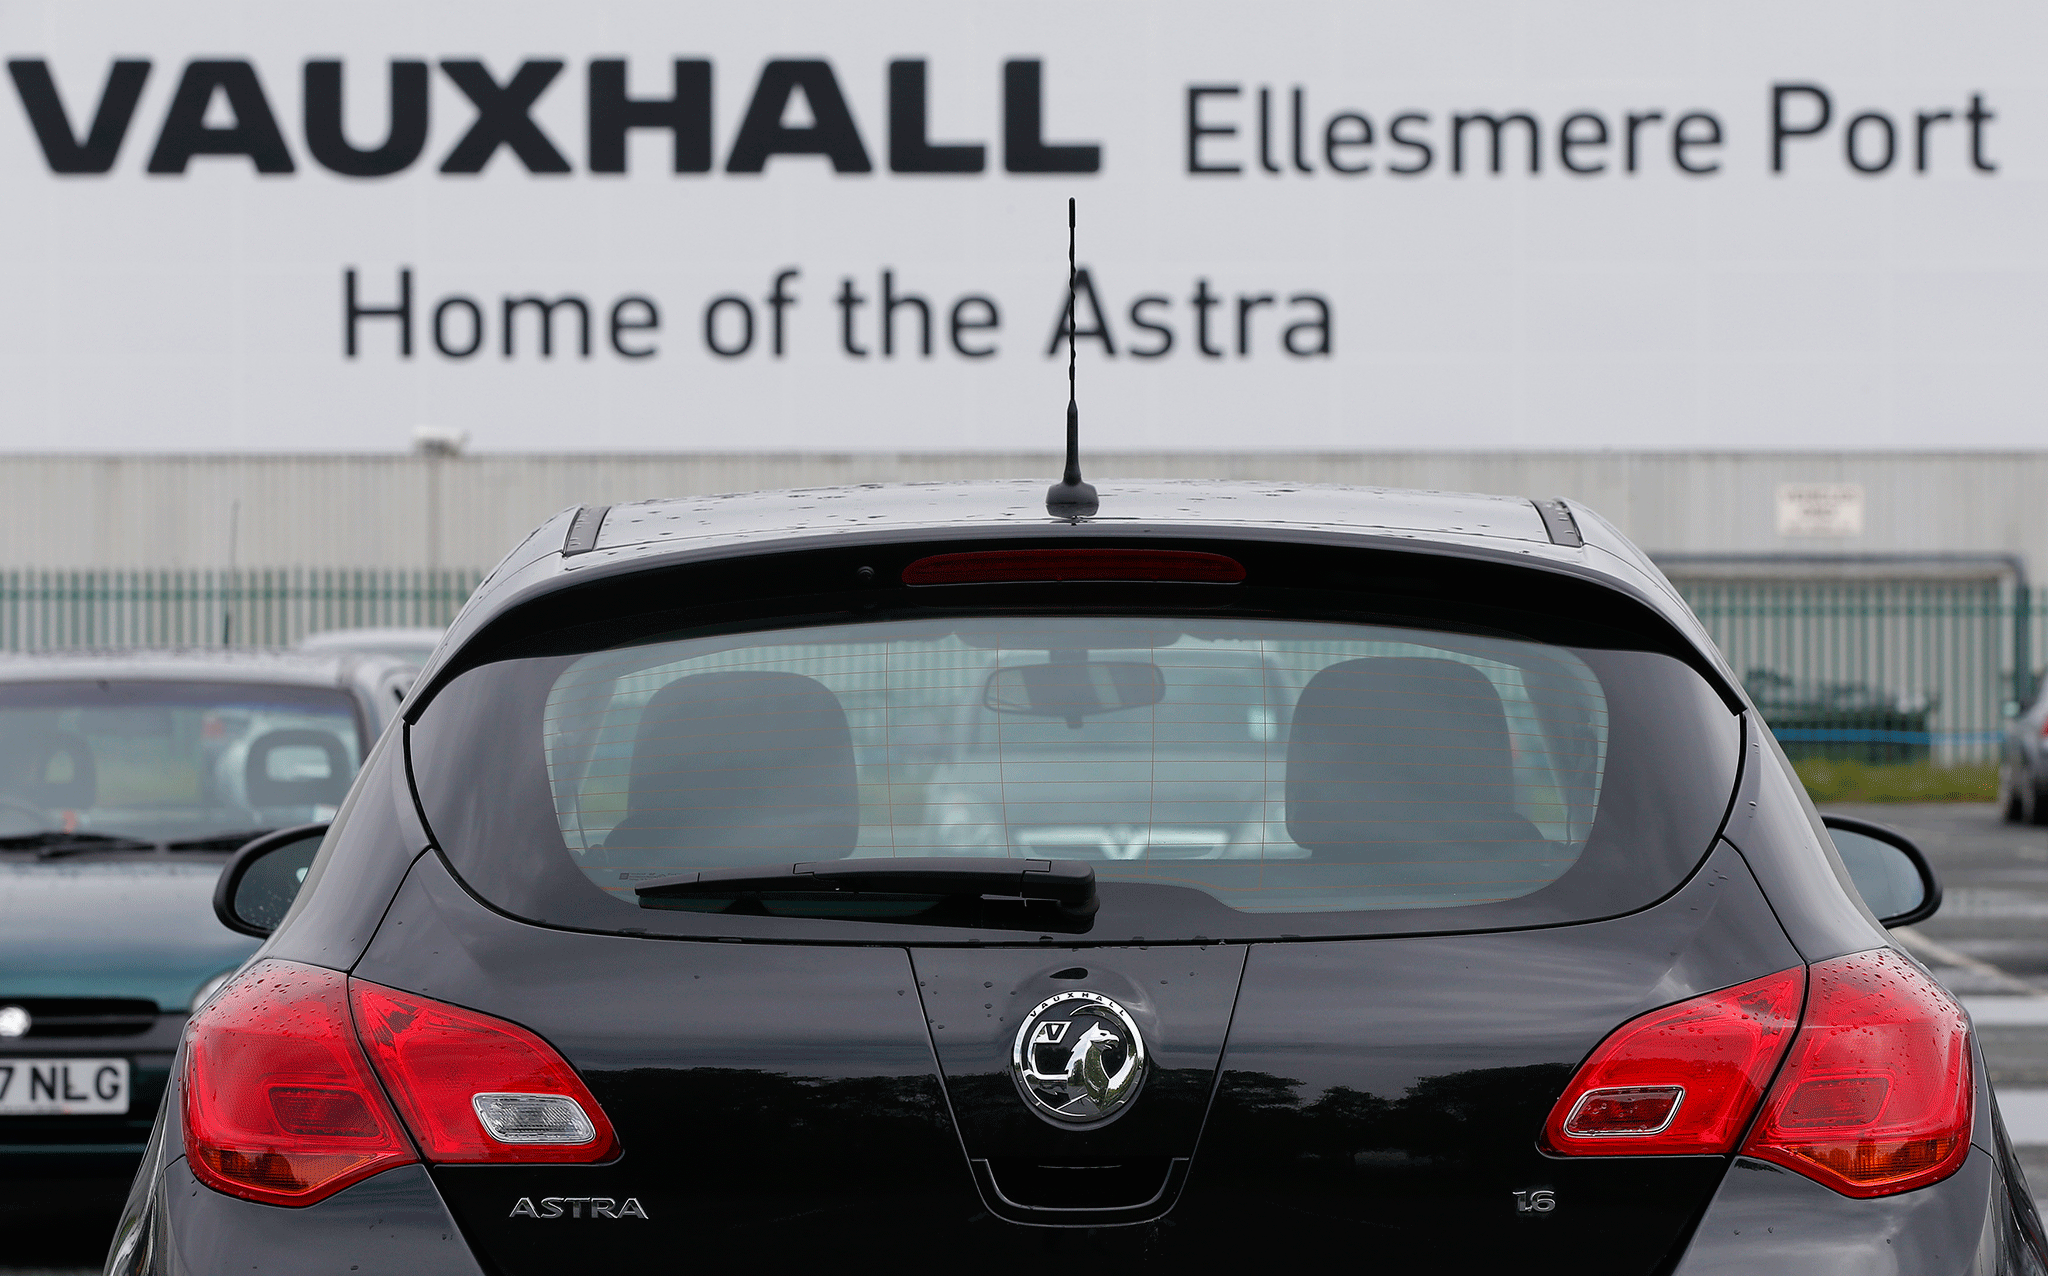 Vauxhall employs 4,500 staff between its two major sites - at Ellesmere Port, which makes the Astra, and Luton where the Vivaro van is produced